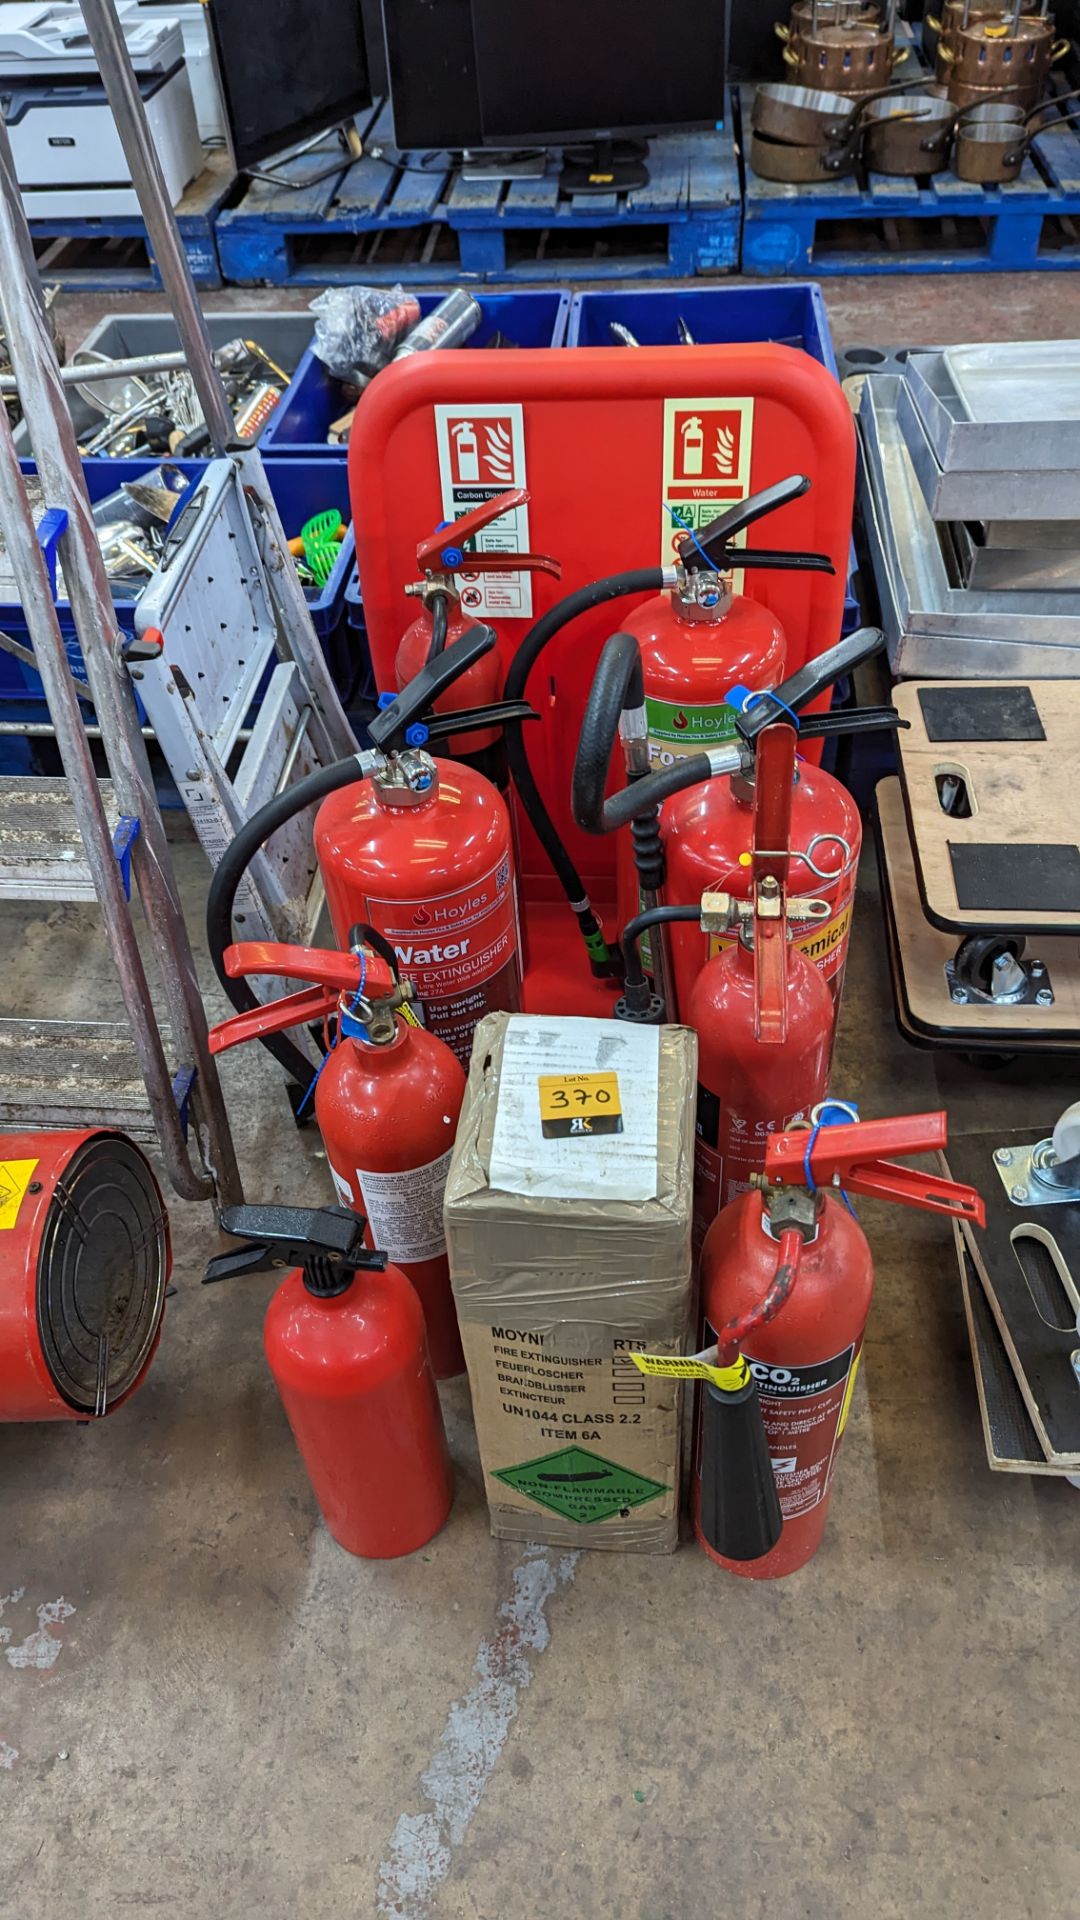 9 off fire extinguishers plus display stand for use with same